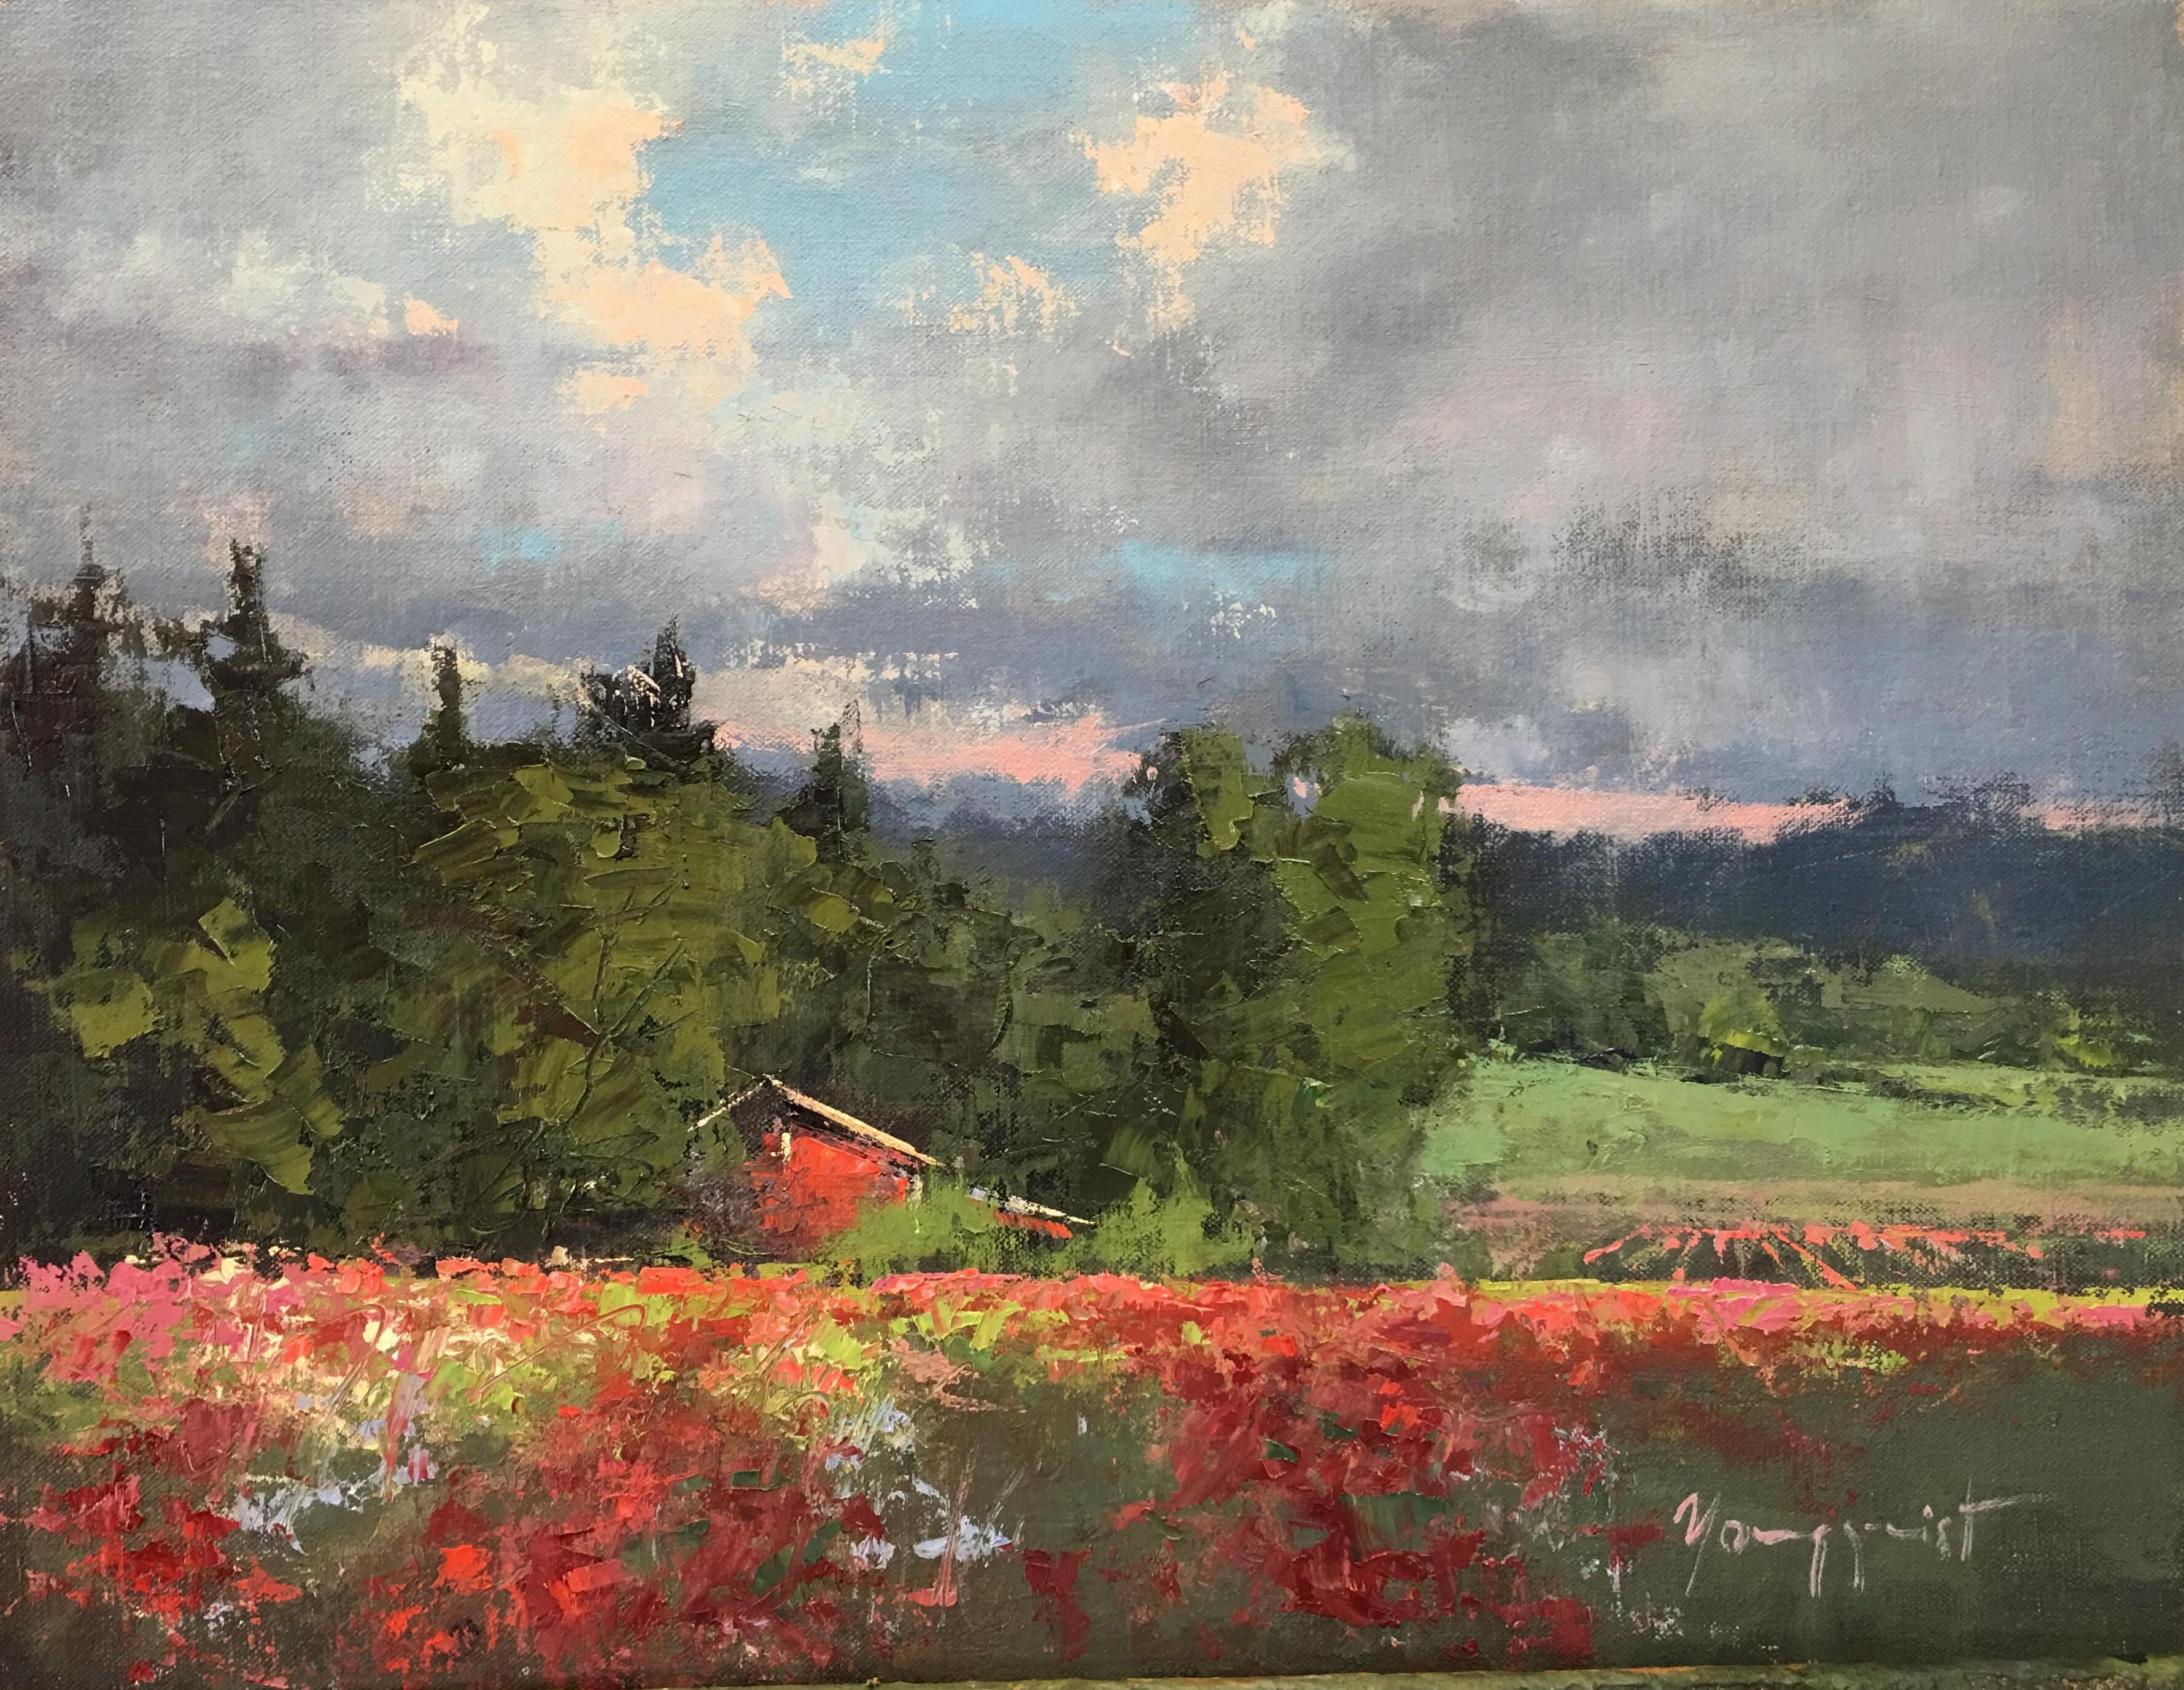 Romona Youngquist, Landscape Painting - "Morning in the Dahlias"